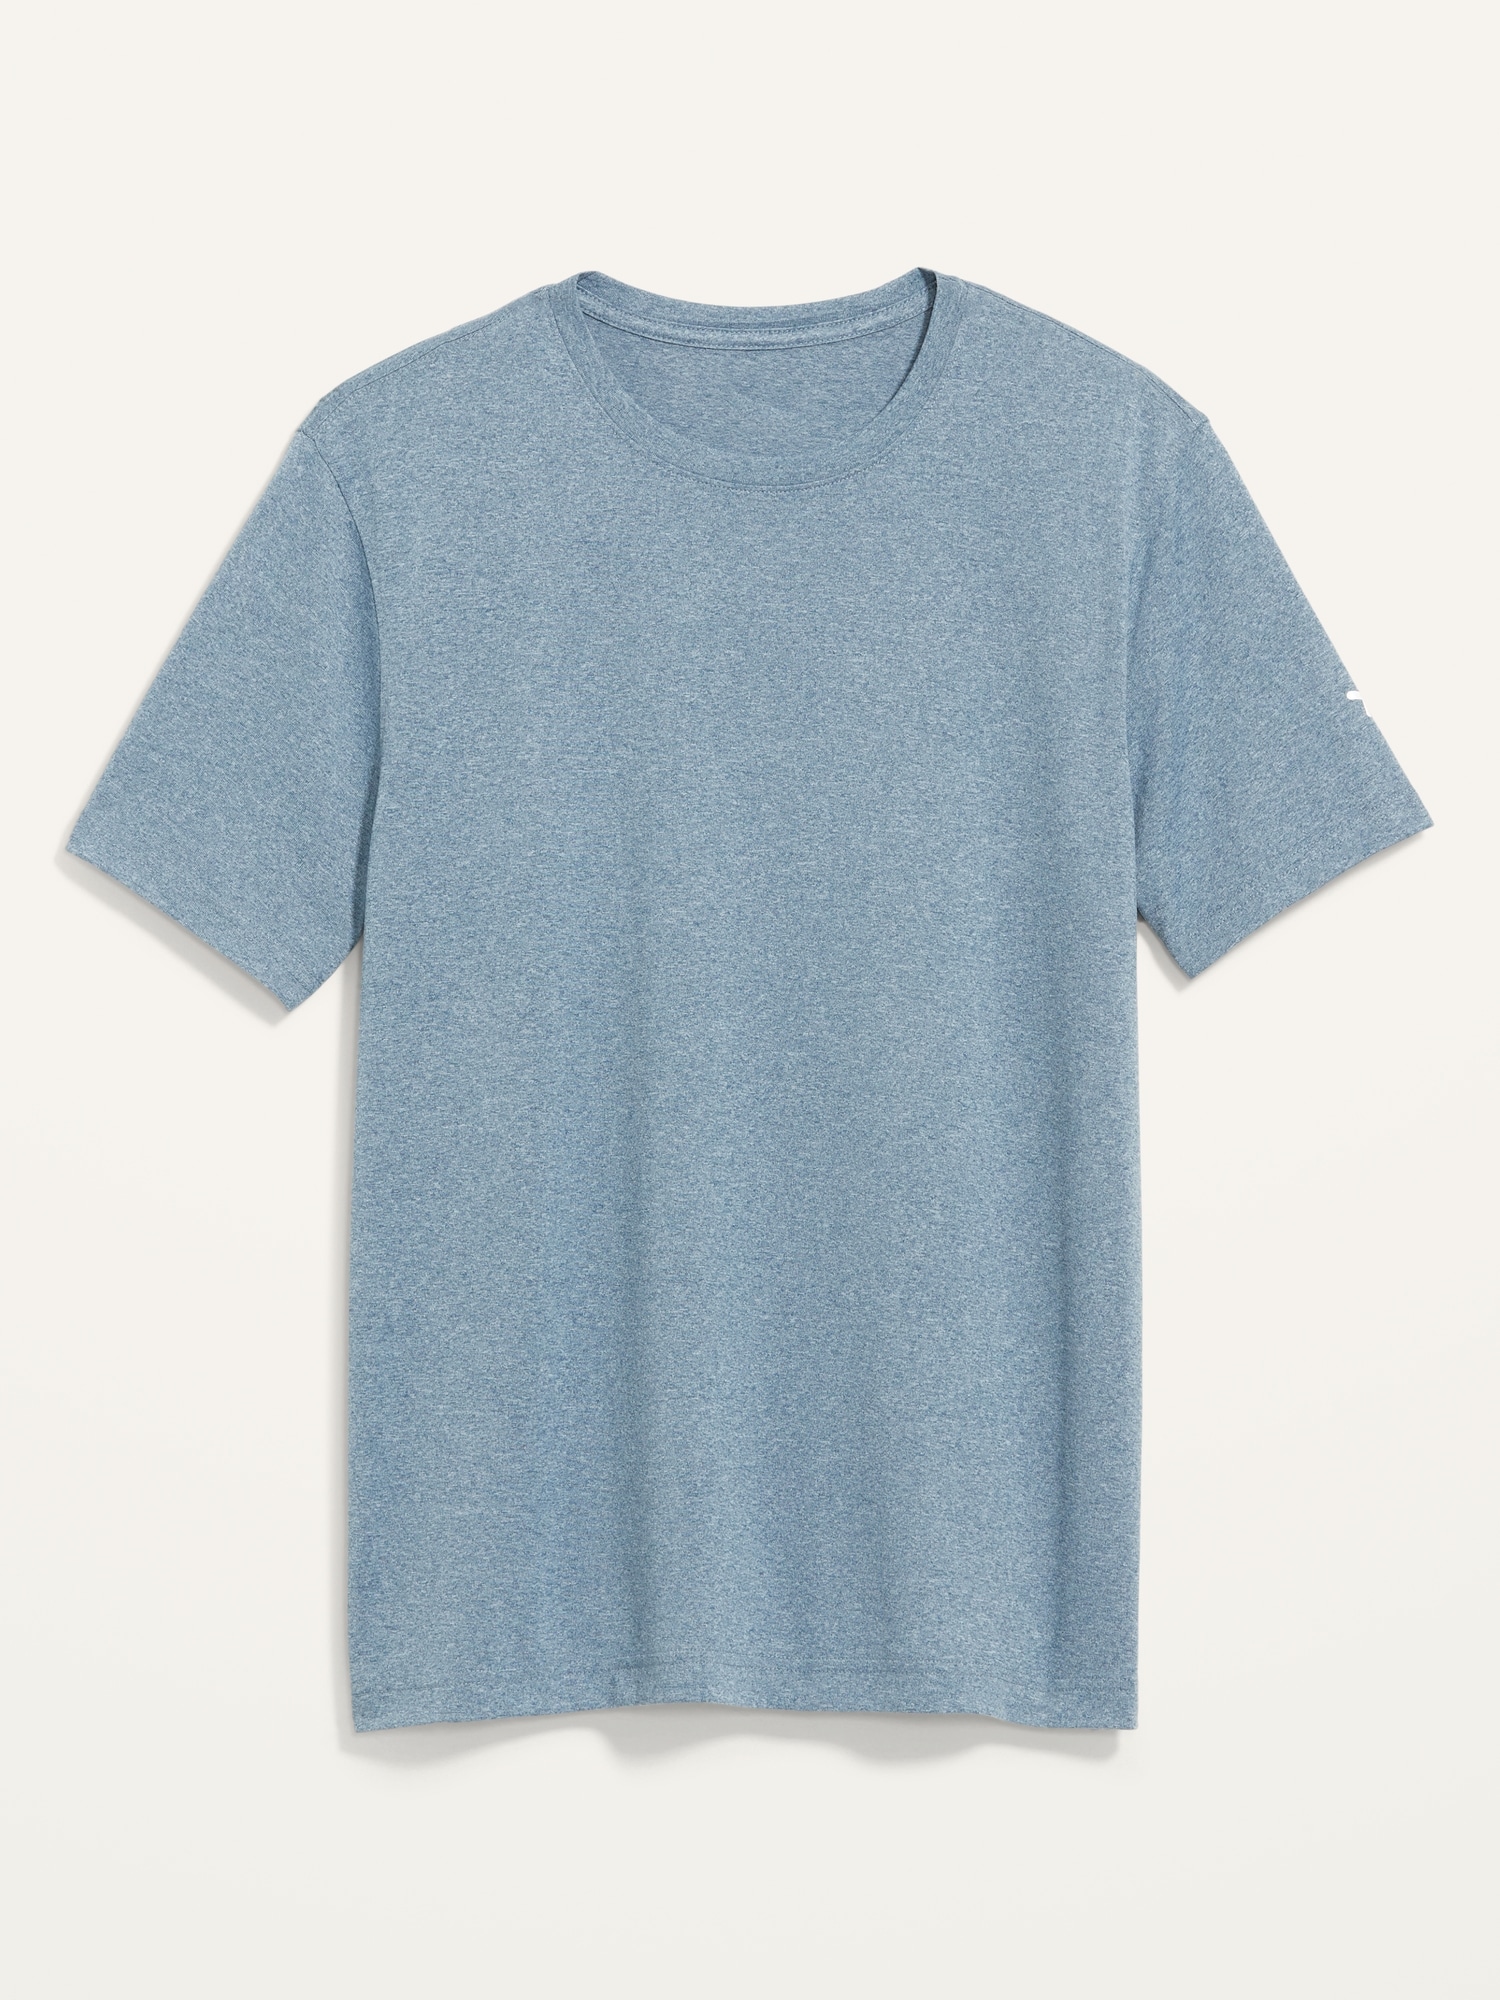 Old Navy Go-Dry Cool Odor-Control Core T-Shirt for Men blue. 1